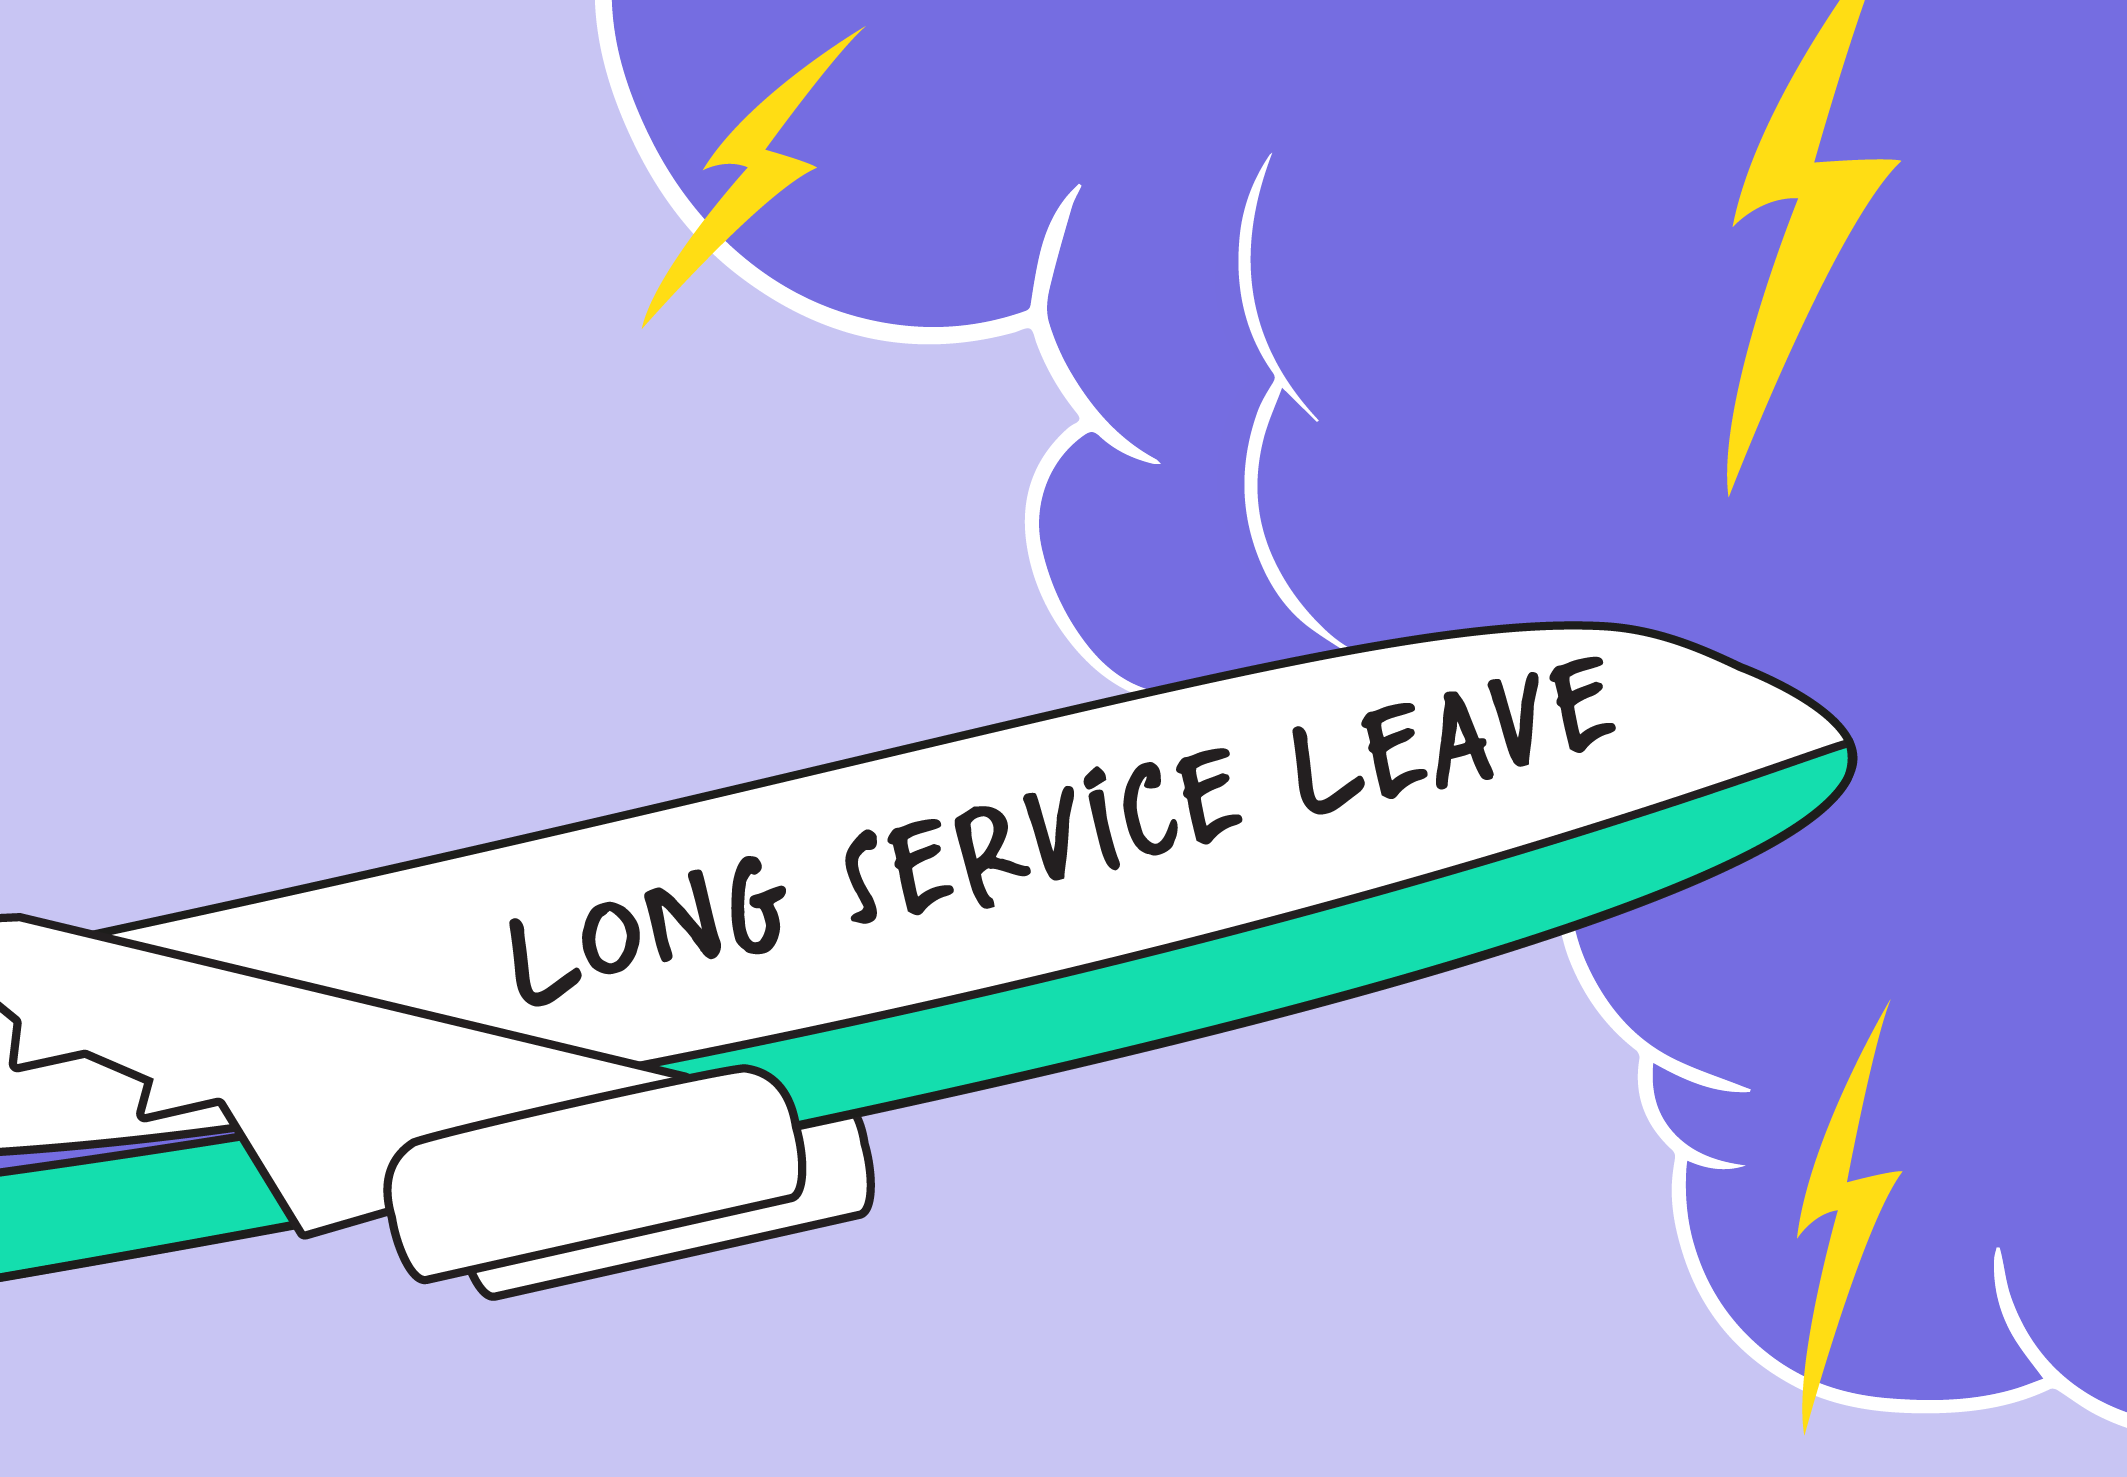 Long Service Leave calculations are complex - Part 1